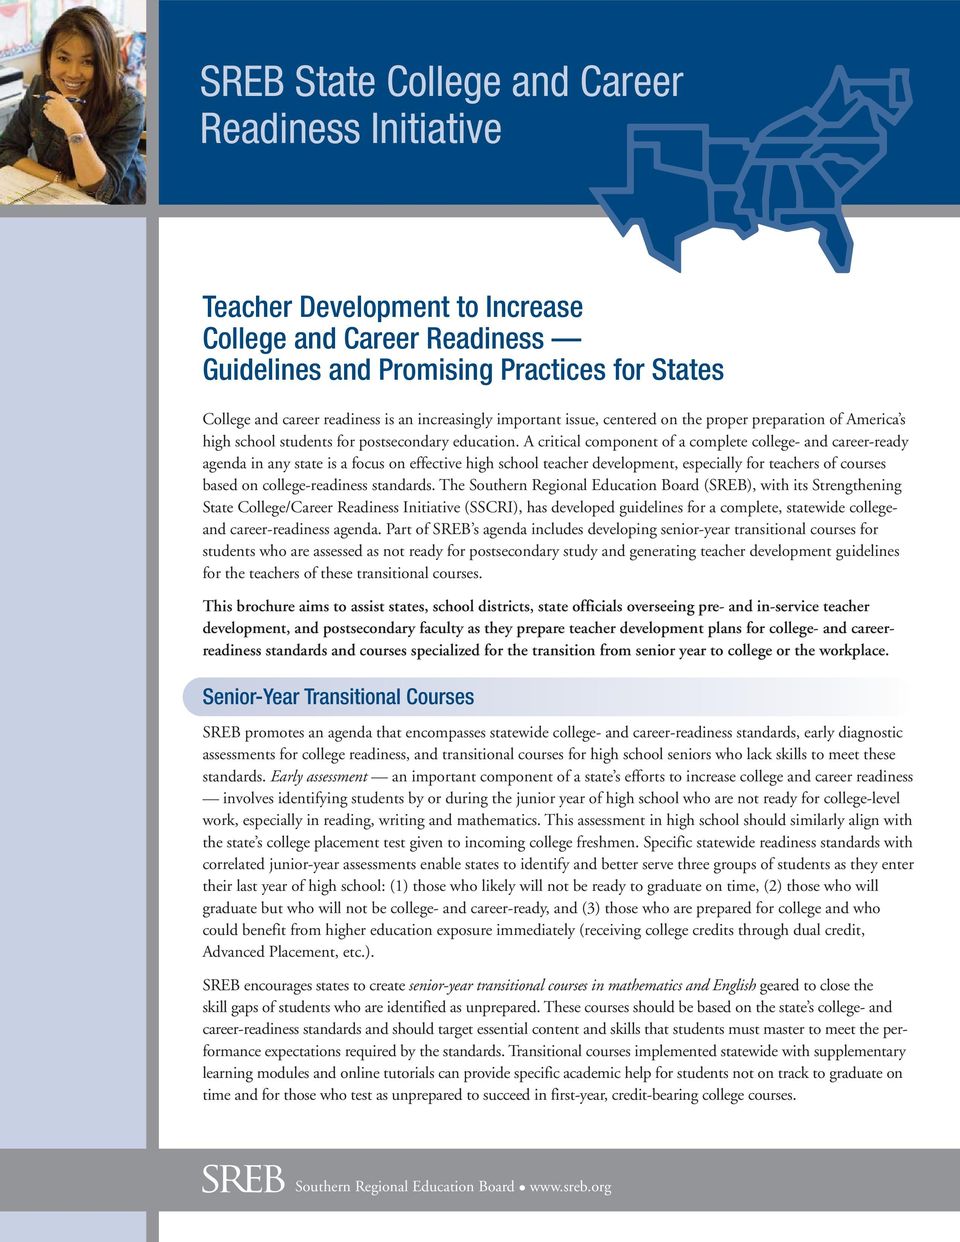 A critical component of a complete college- and career-ready agenda in any state is a focus on effective high school teacher development, especially for teachers of courses based on college-readiness